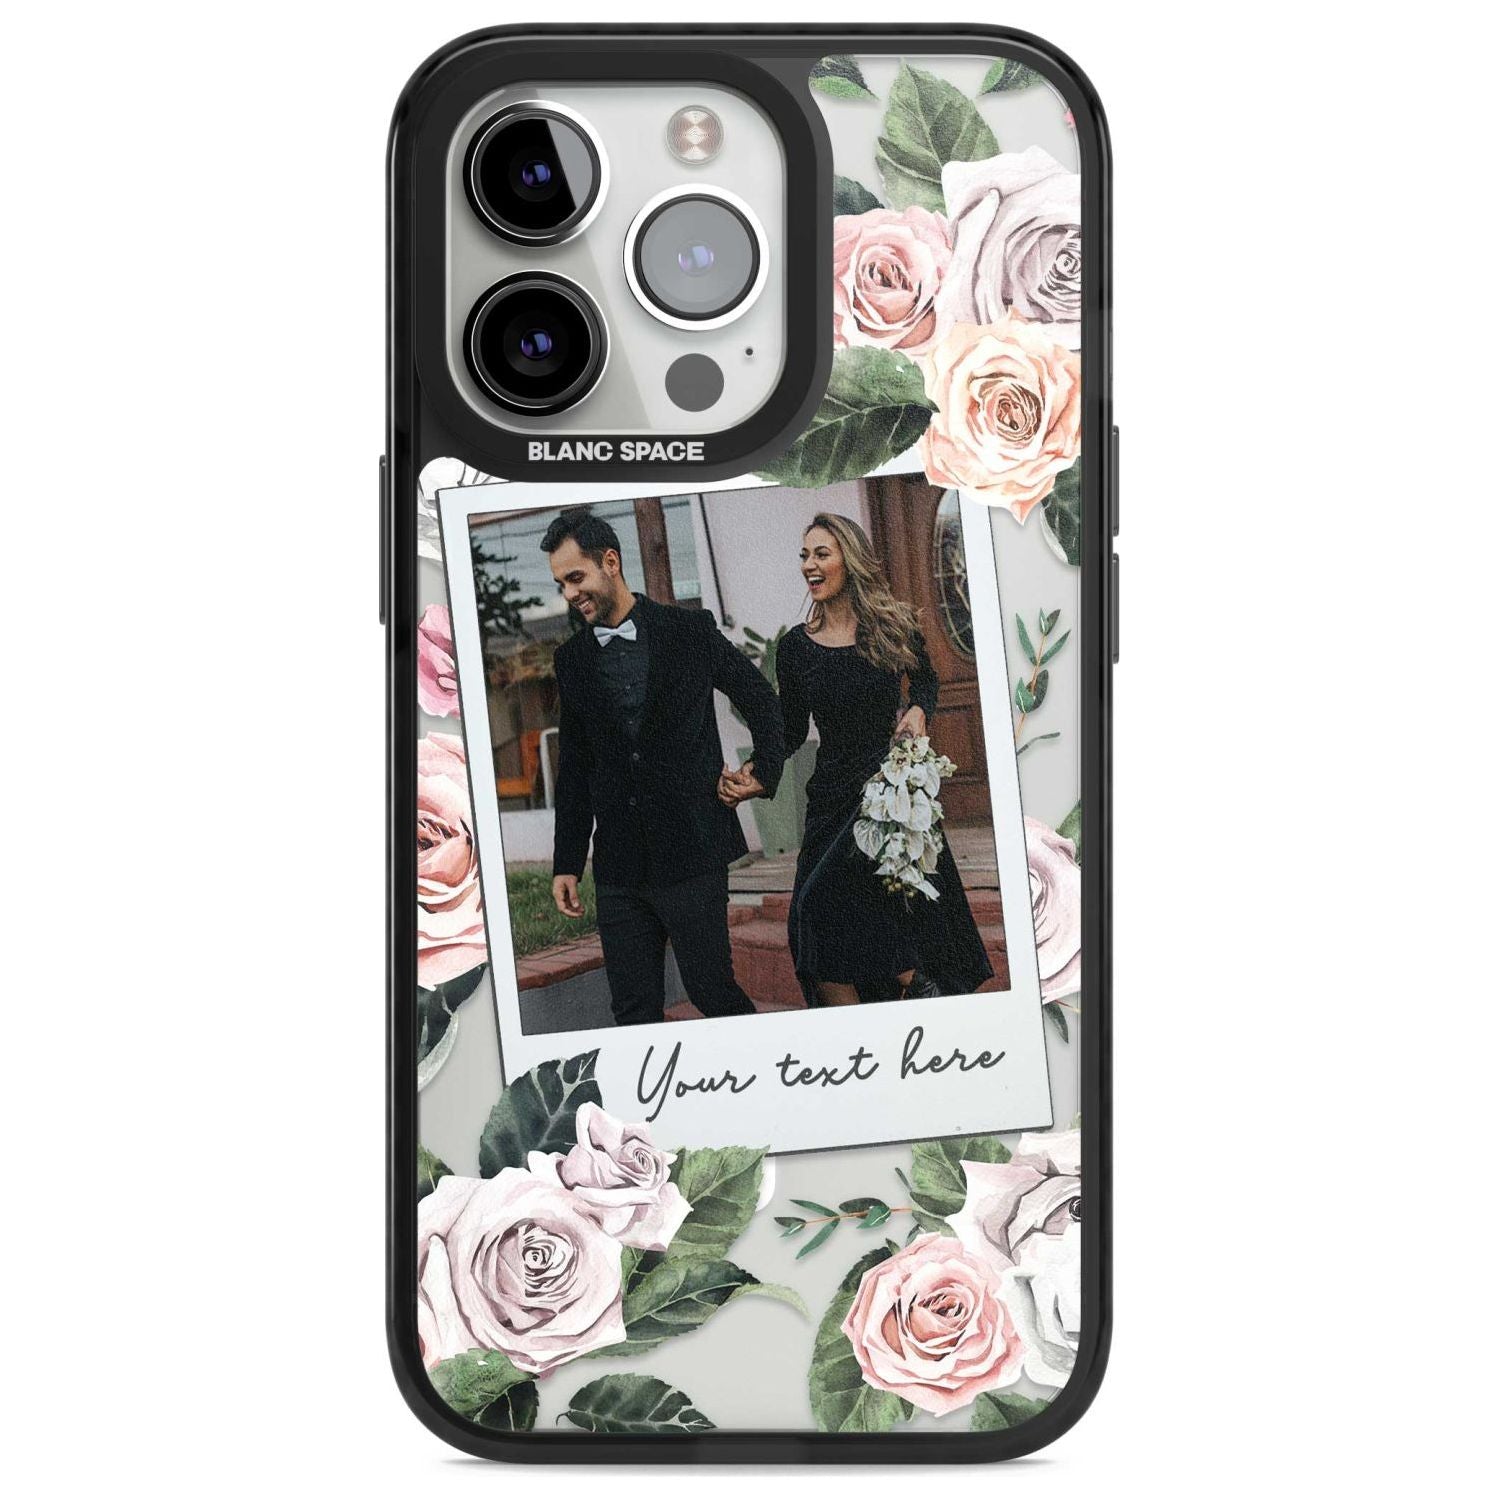 Personalised Floral Instant Film Photo Custom Phone Case iPhone 15 Pro Max / Magsafe Black Impact Case,iPhone 15 Pro / Magsafe Black Impact Case,iPhone 14 Pro Max / Magsafe Black Impact Case,iPhone 14 Pro / Magsafe Black Impact Case,iPhone 13 Pro / Magsafe Black Impact Case Blanc Space